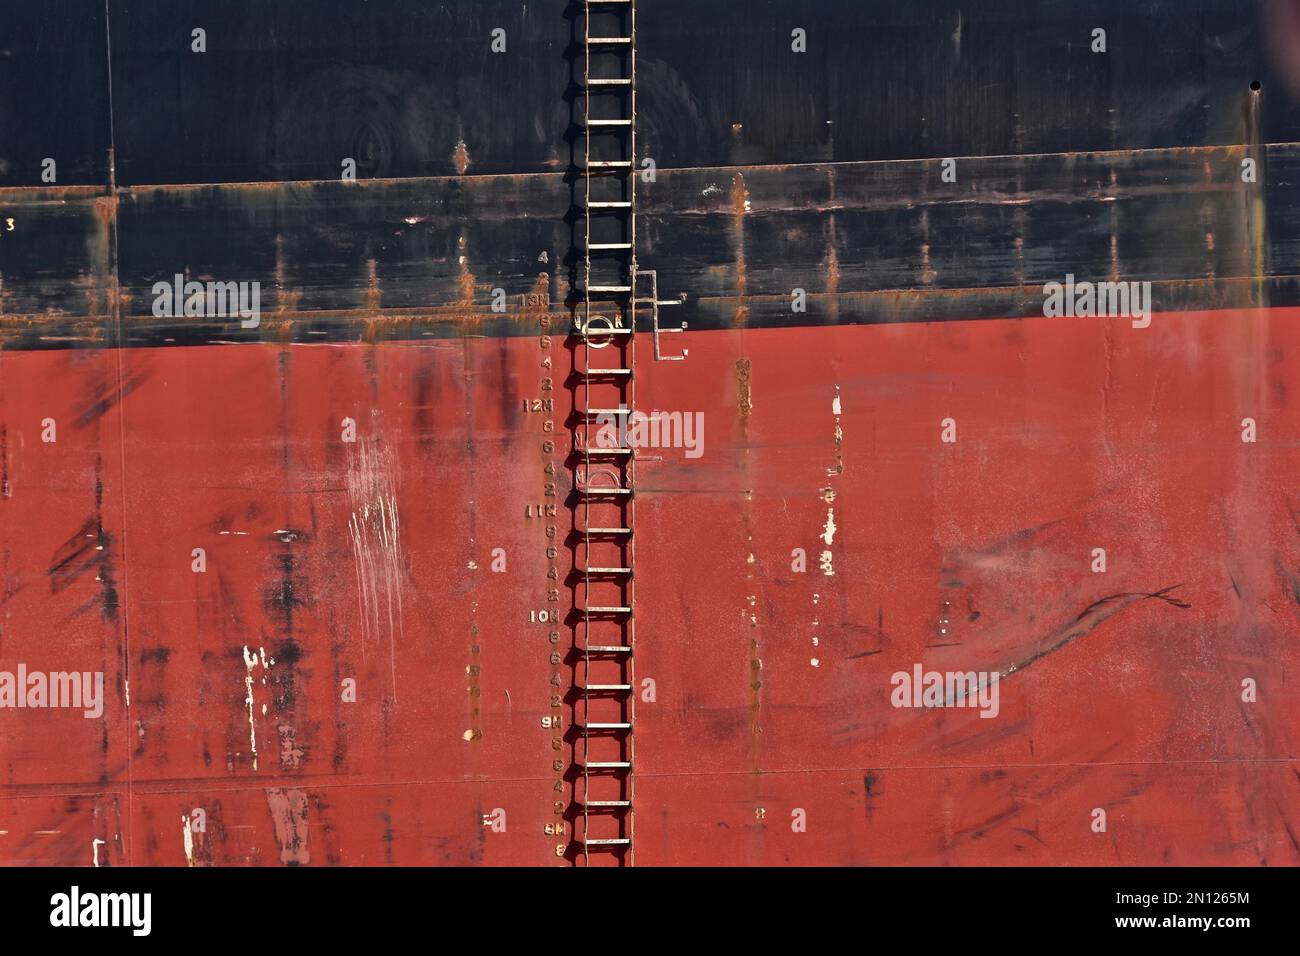 Rope ladder on the red and black side of a freighter Stock Photo